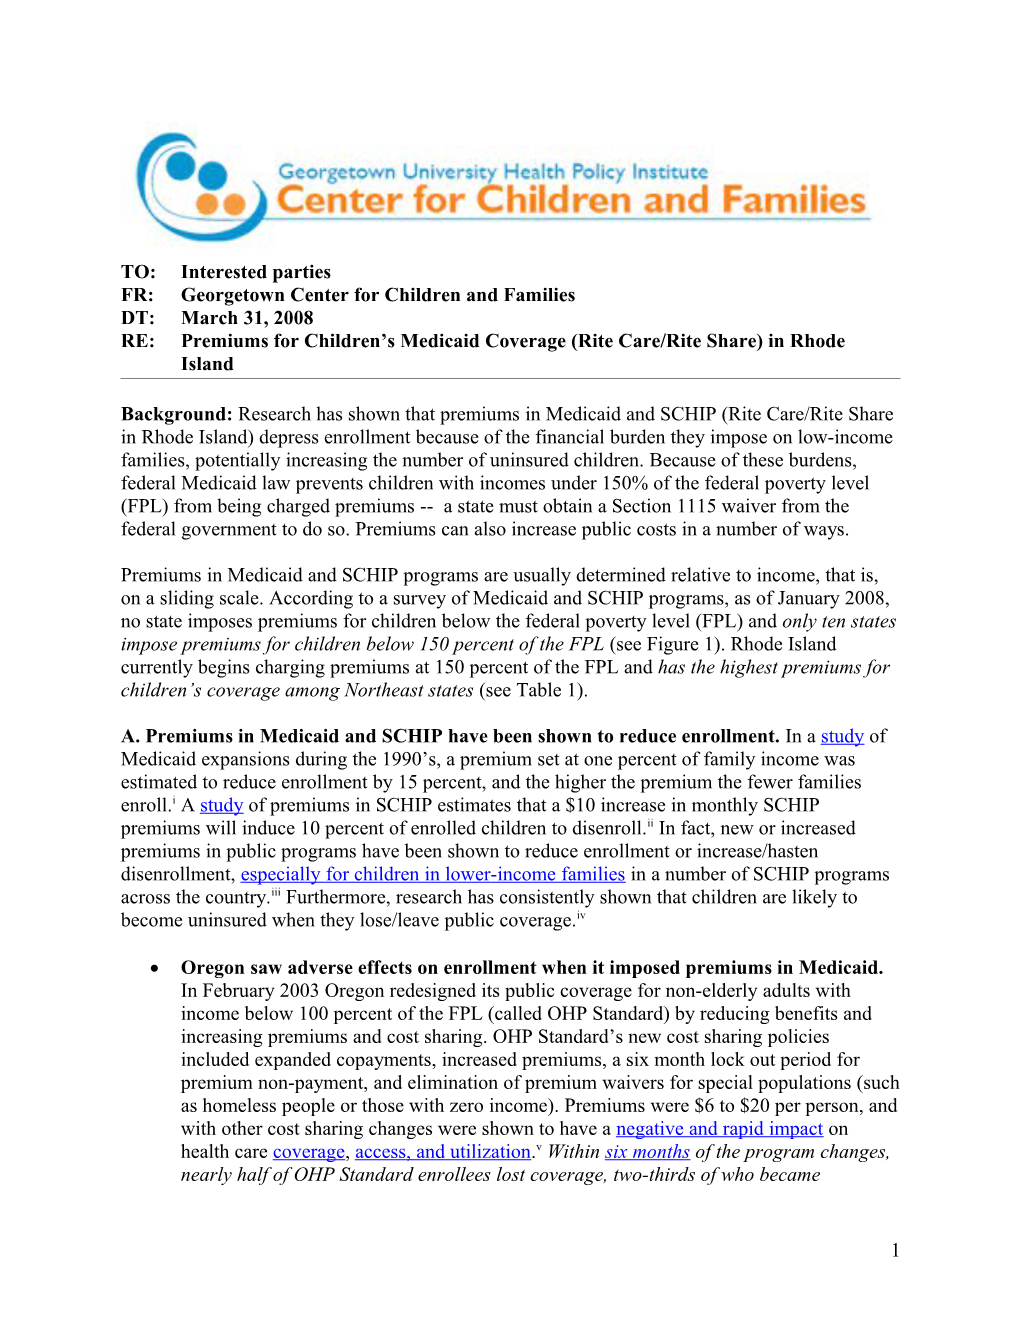 FR: Georgetown Center for Children and Families